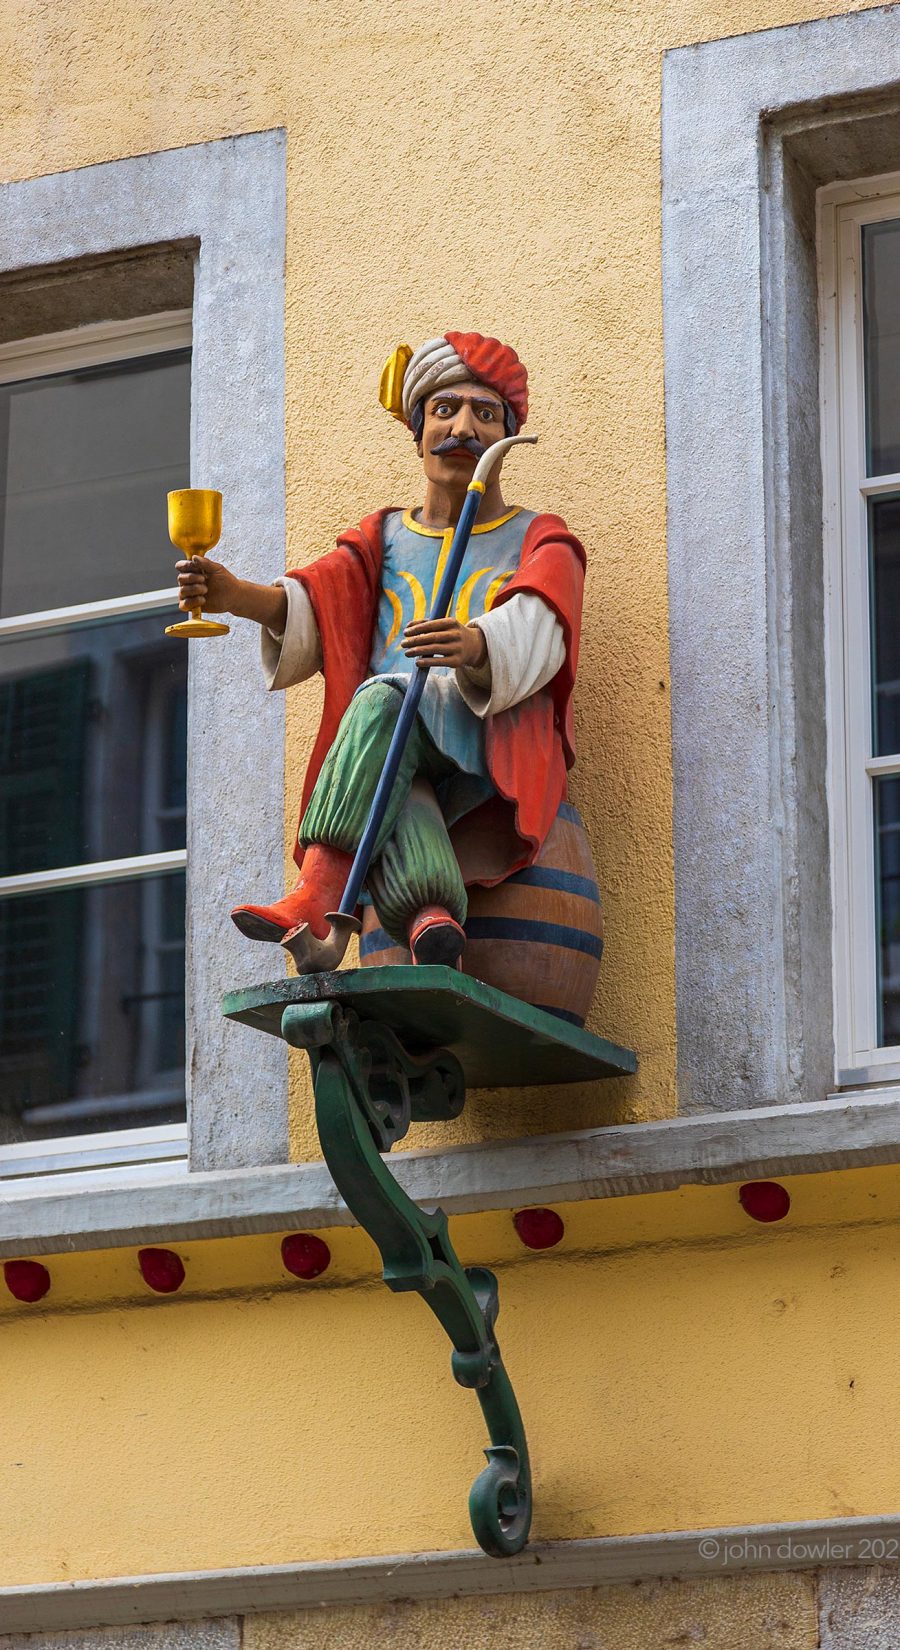 A carved wooden man in Turkish attire offering a meter-long pipe and a golden goblet from a platform on a wall in Solothurn, Switzerland.